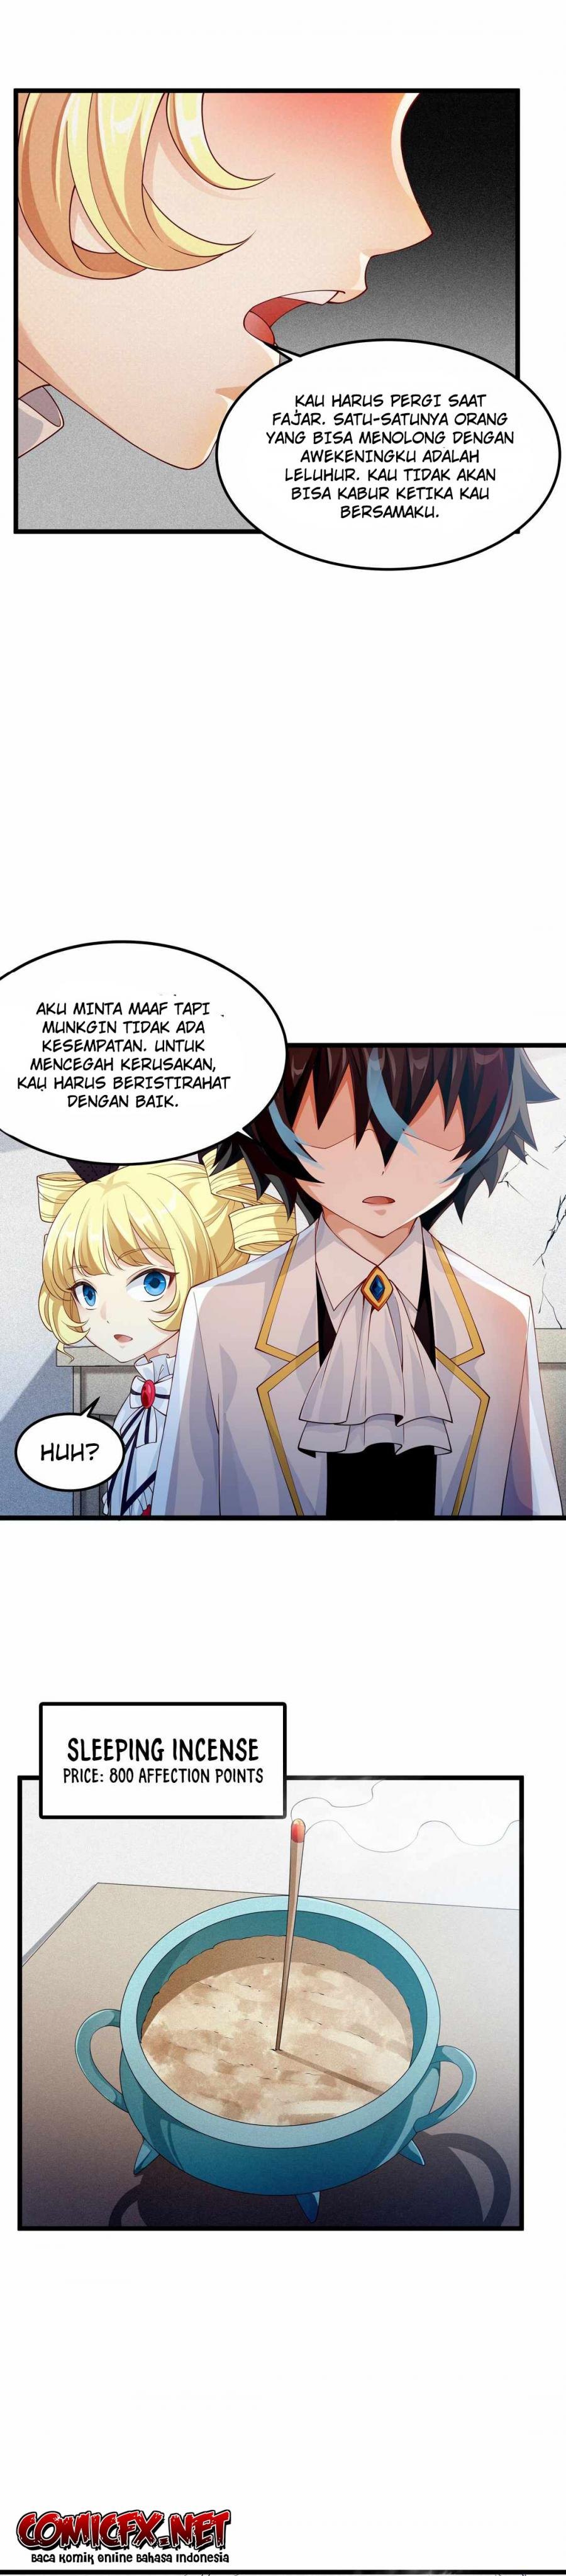 Dilarang COPAS - situs resmi www.mangacanblog.com - Komik little tyrant doesnt want to meet with a bad end 016 - chapter 16 17 Indonesia little tyrant doesnt want to meet with a bad end 016 - chapter 16 Terbaru 19|Baca Manga Komik Indonesia|Mangacan